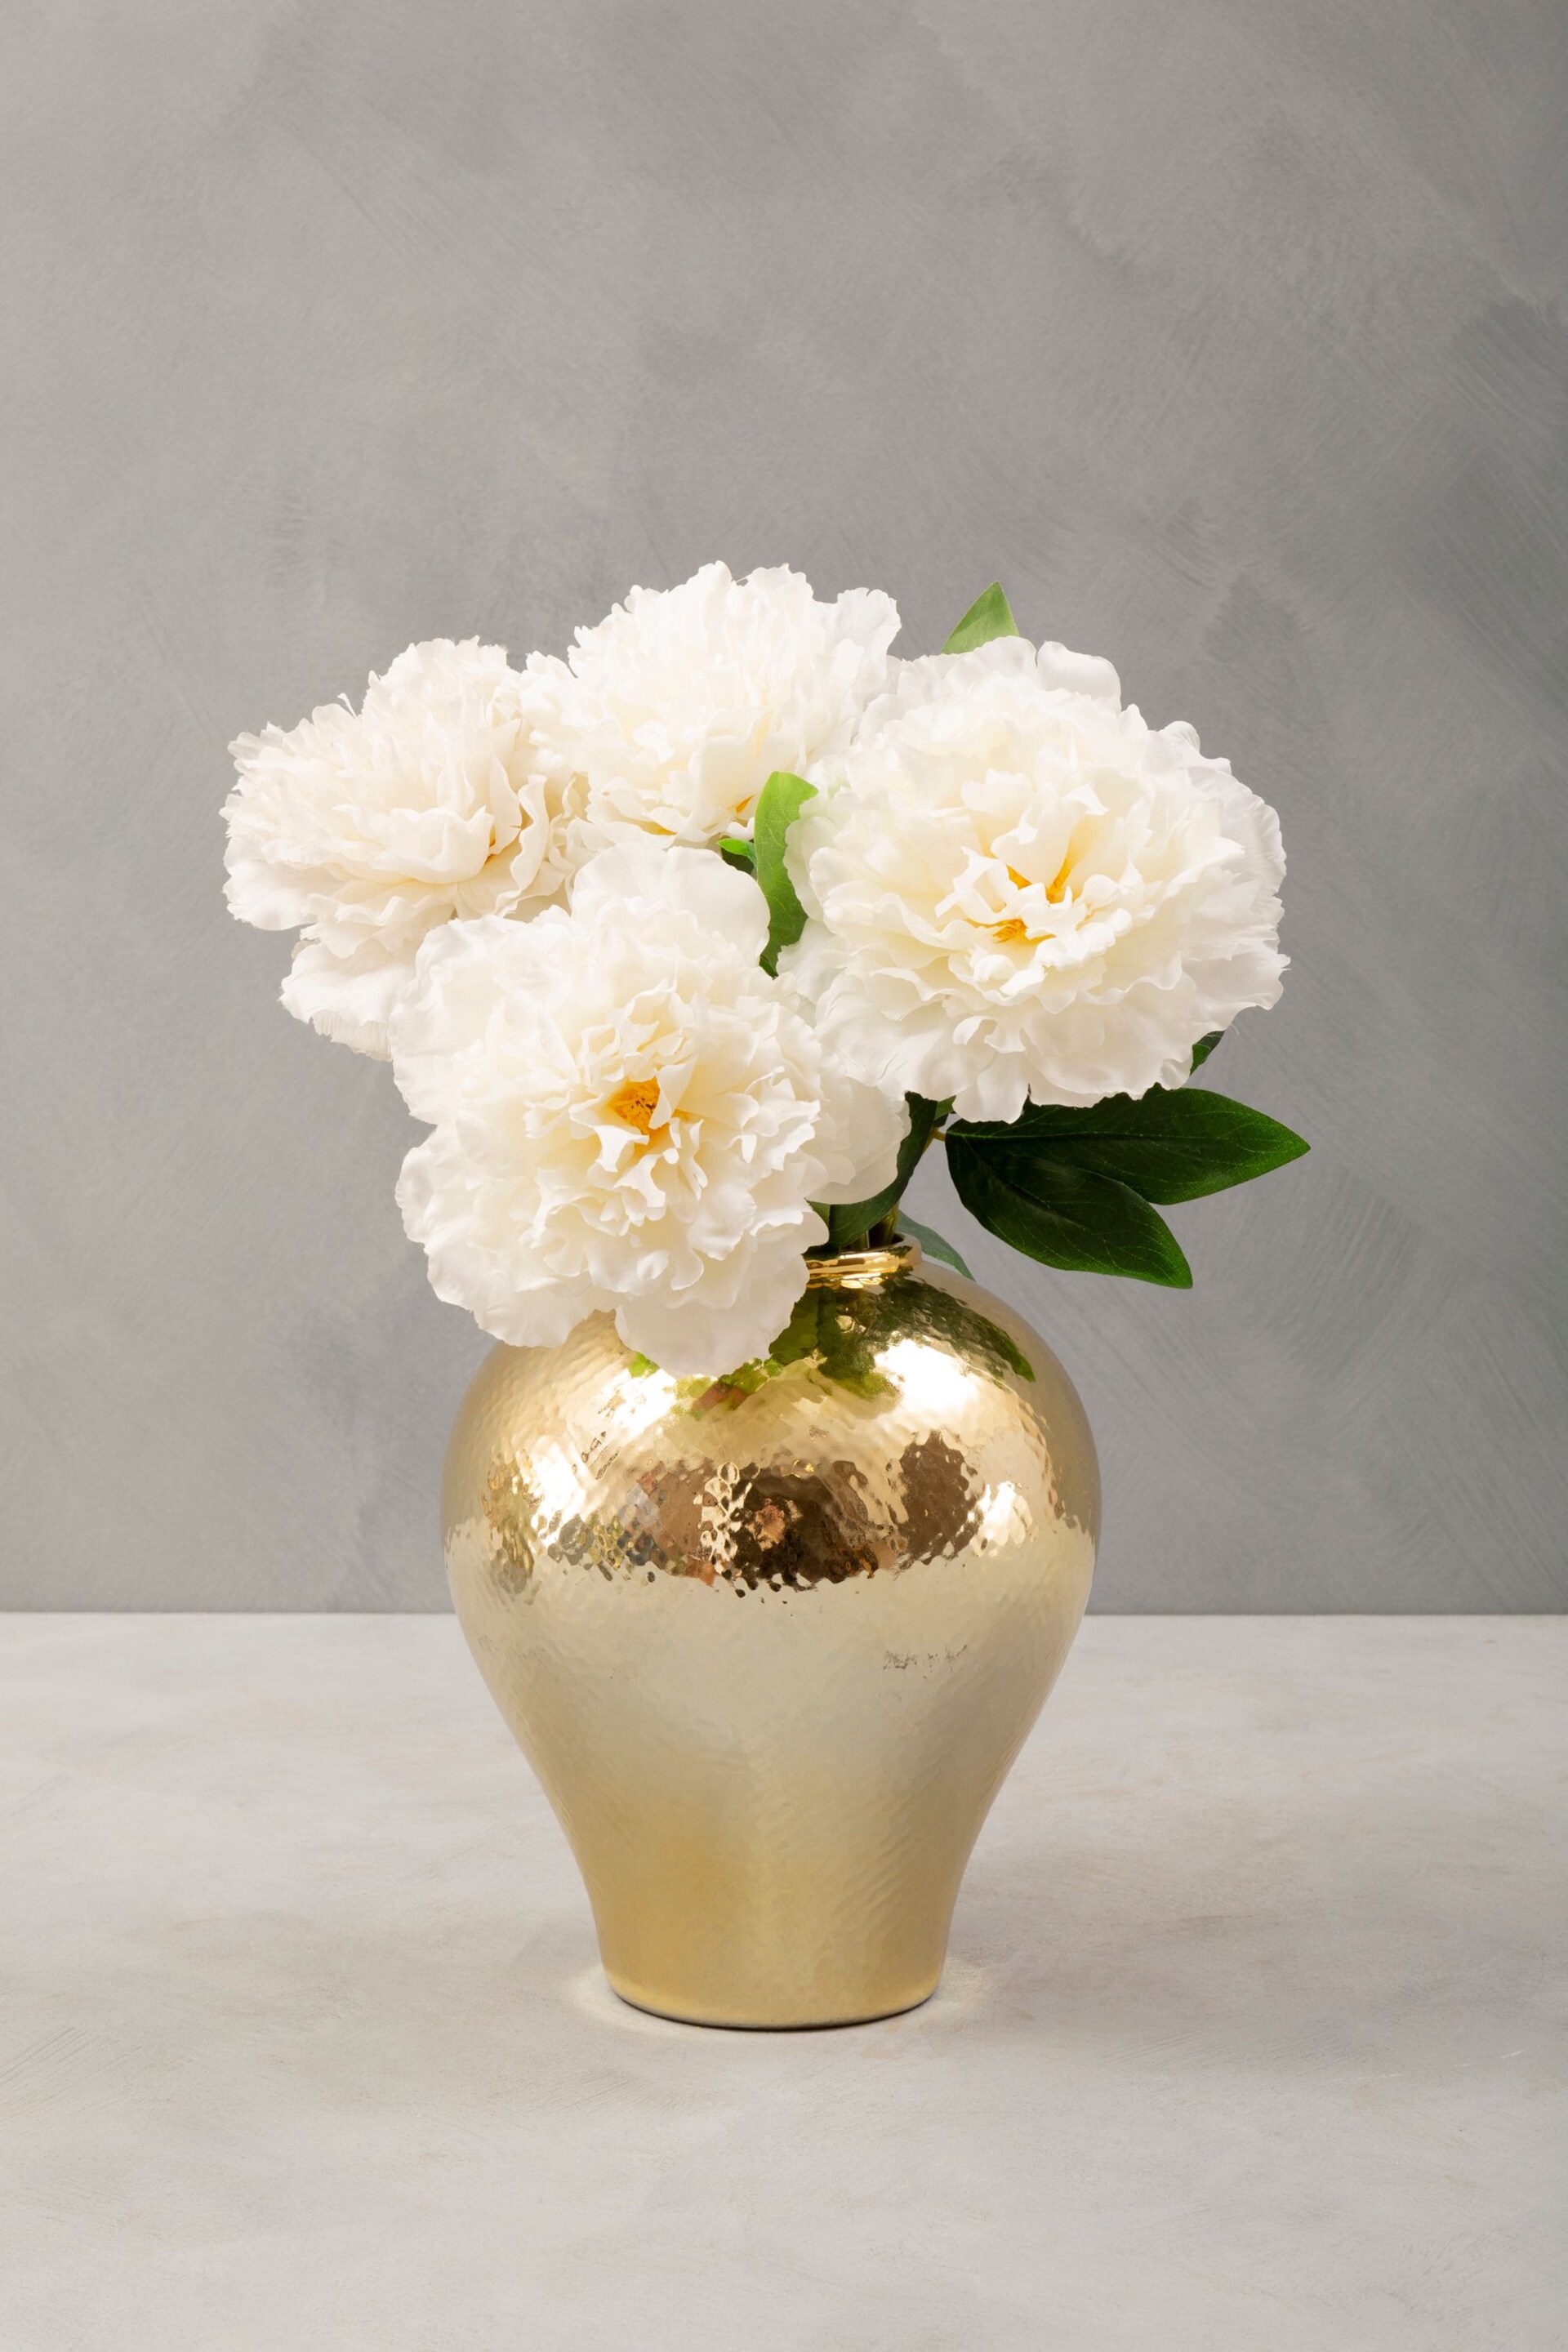 Fifty Five South Gold Finish Small Ceramic Vase - Image 1 of 4